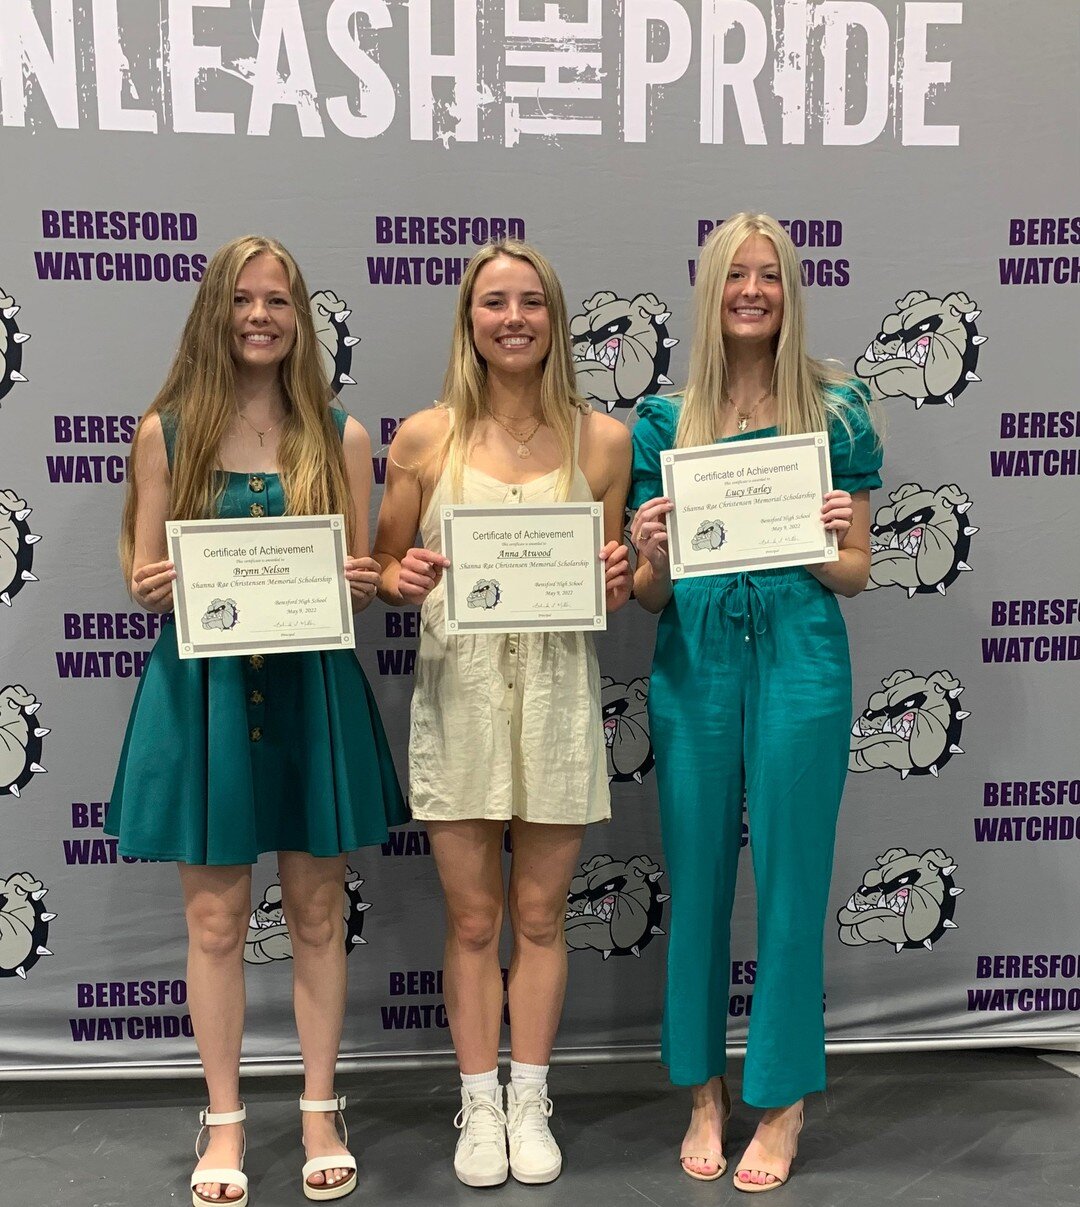 Shanna Rae Christensen Memorial Scholarship Recipients 

The Watchdog Foundation Board is pleased to announce that Anna Atwood, Lucy Farley, and Brynn Nelson each earned a Shanna Rae Christensen Memorial Scholarship. Congratulations to Anna, Lucy, an